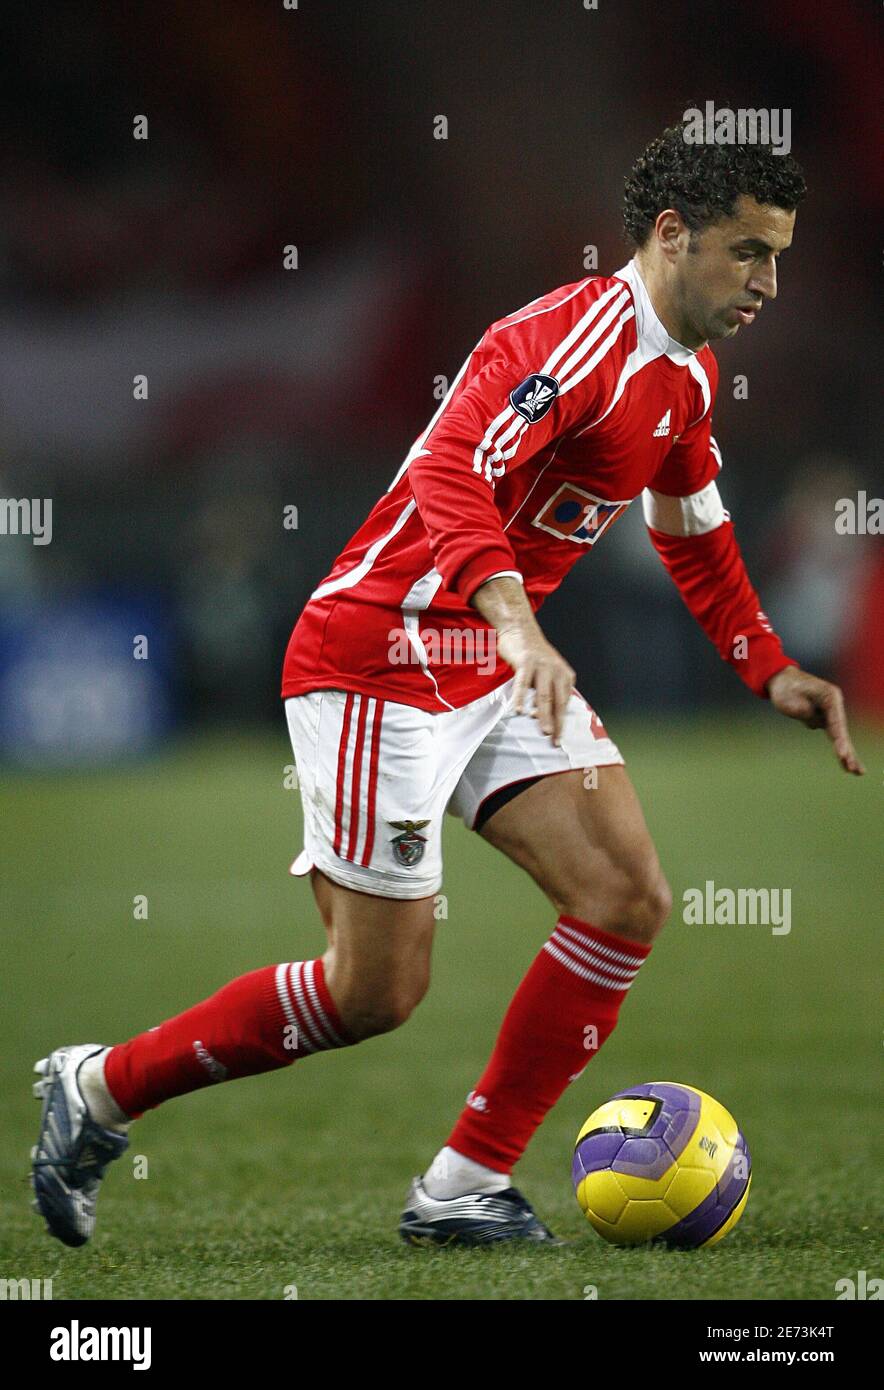 Benfica's Simao Sabrosa during the UEFA Cup second knockout round first leg game soccer match PSG vs Benfica, at the Parc des Princes stadium in Paris, France, on March 8, 2007. PSG won 2-1. Photo by Christian Liewig/ABACAPRESS.COM Stock Photo